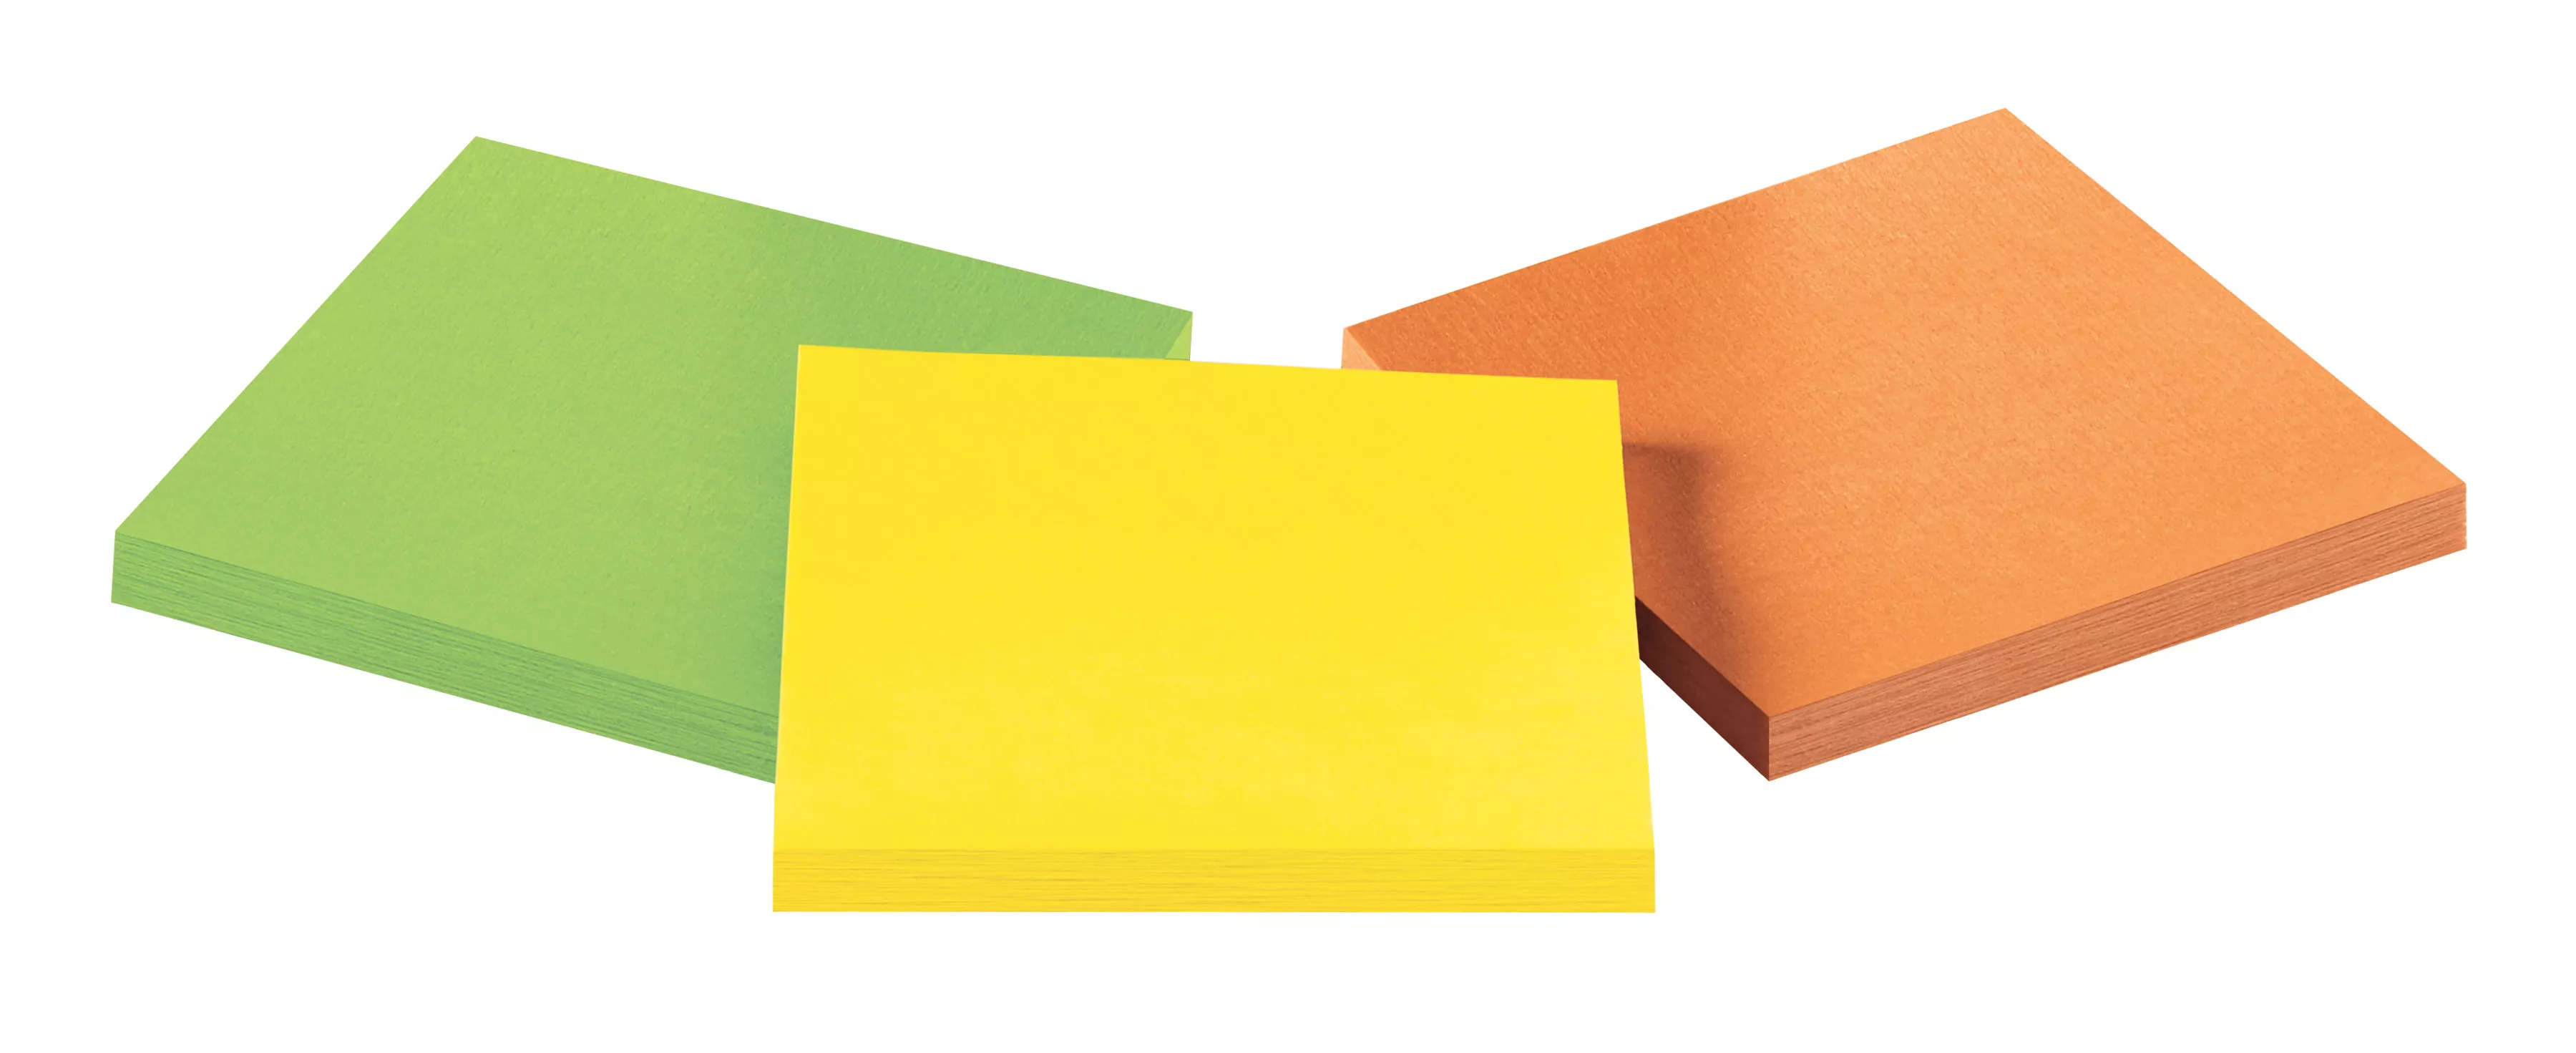 SKU 7100154146 | Post-it® Extreme Notes